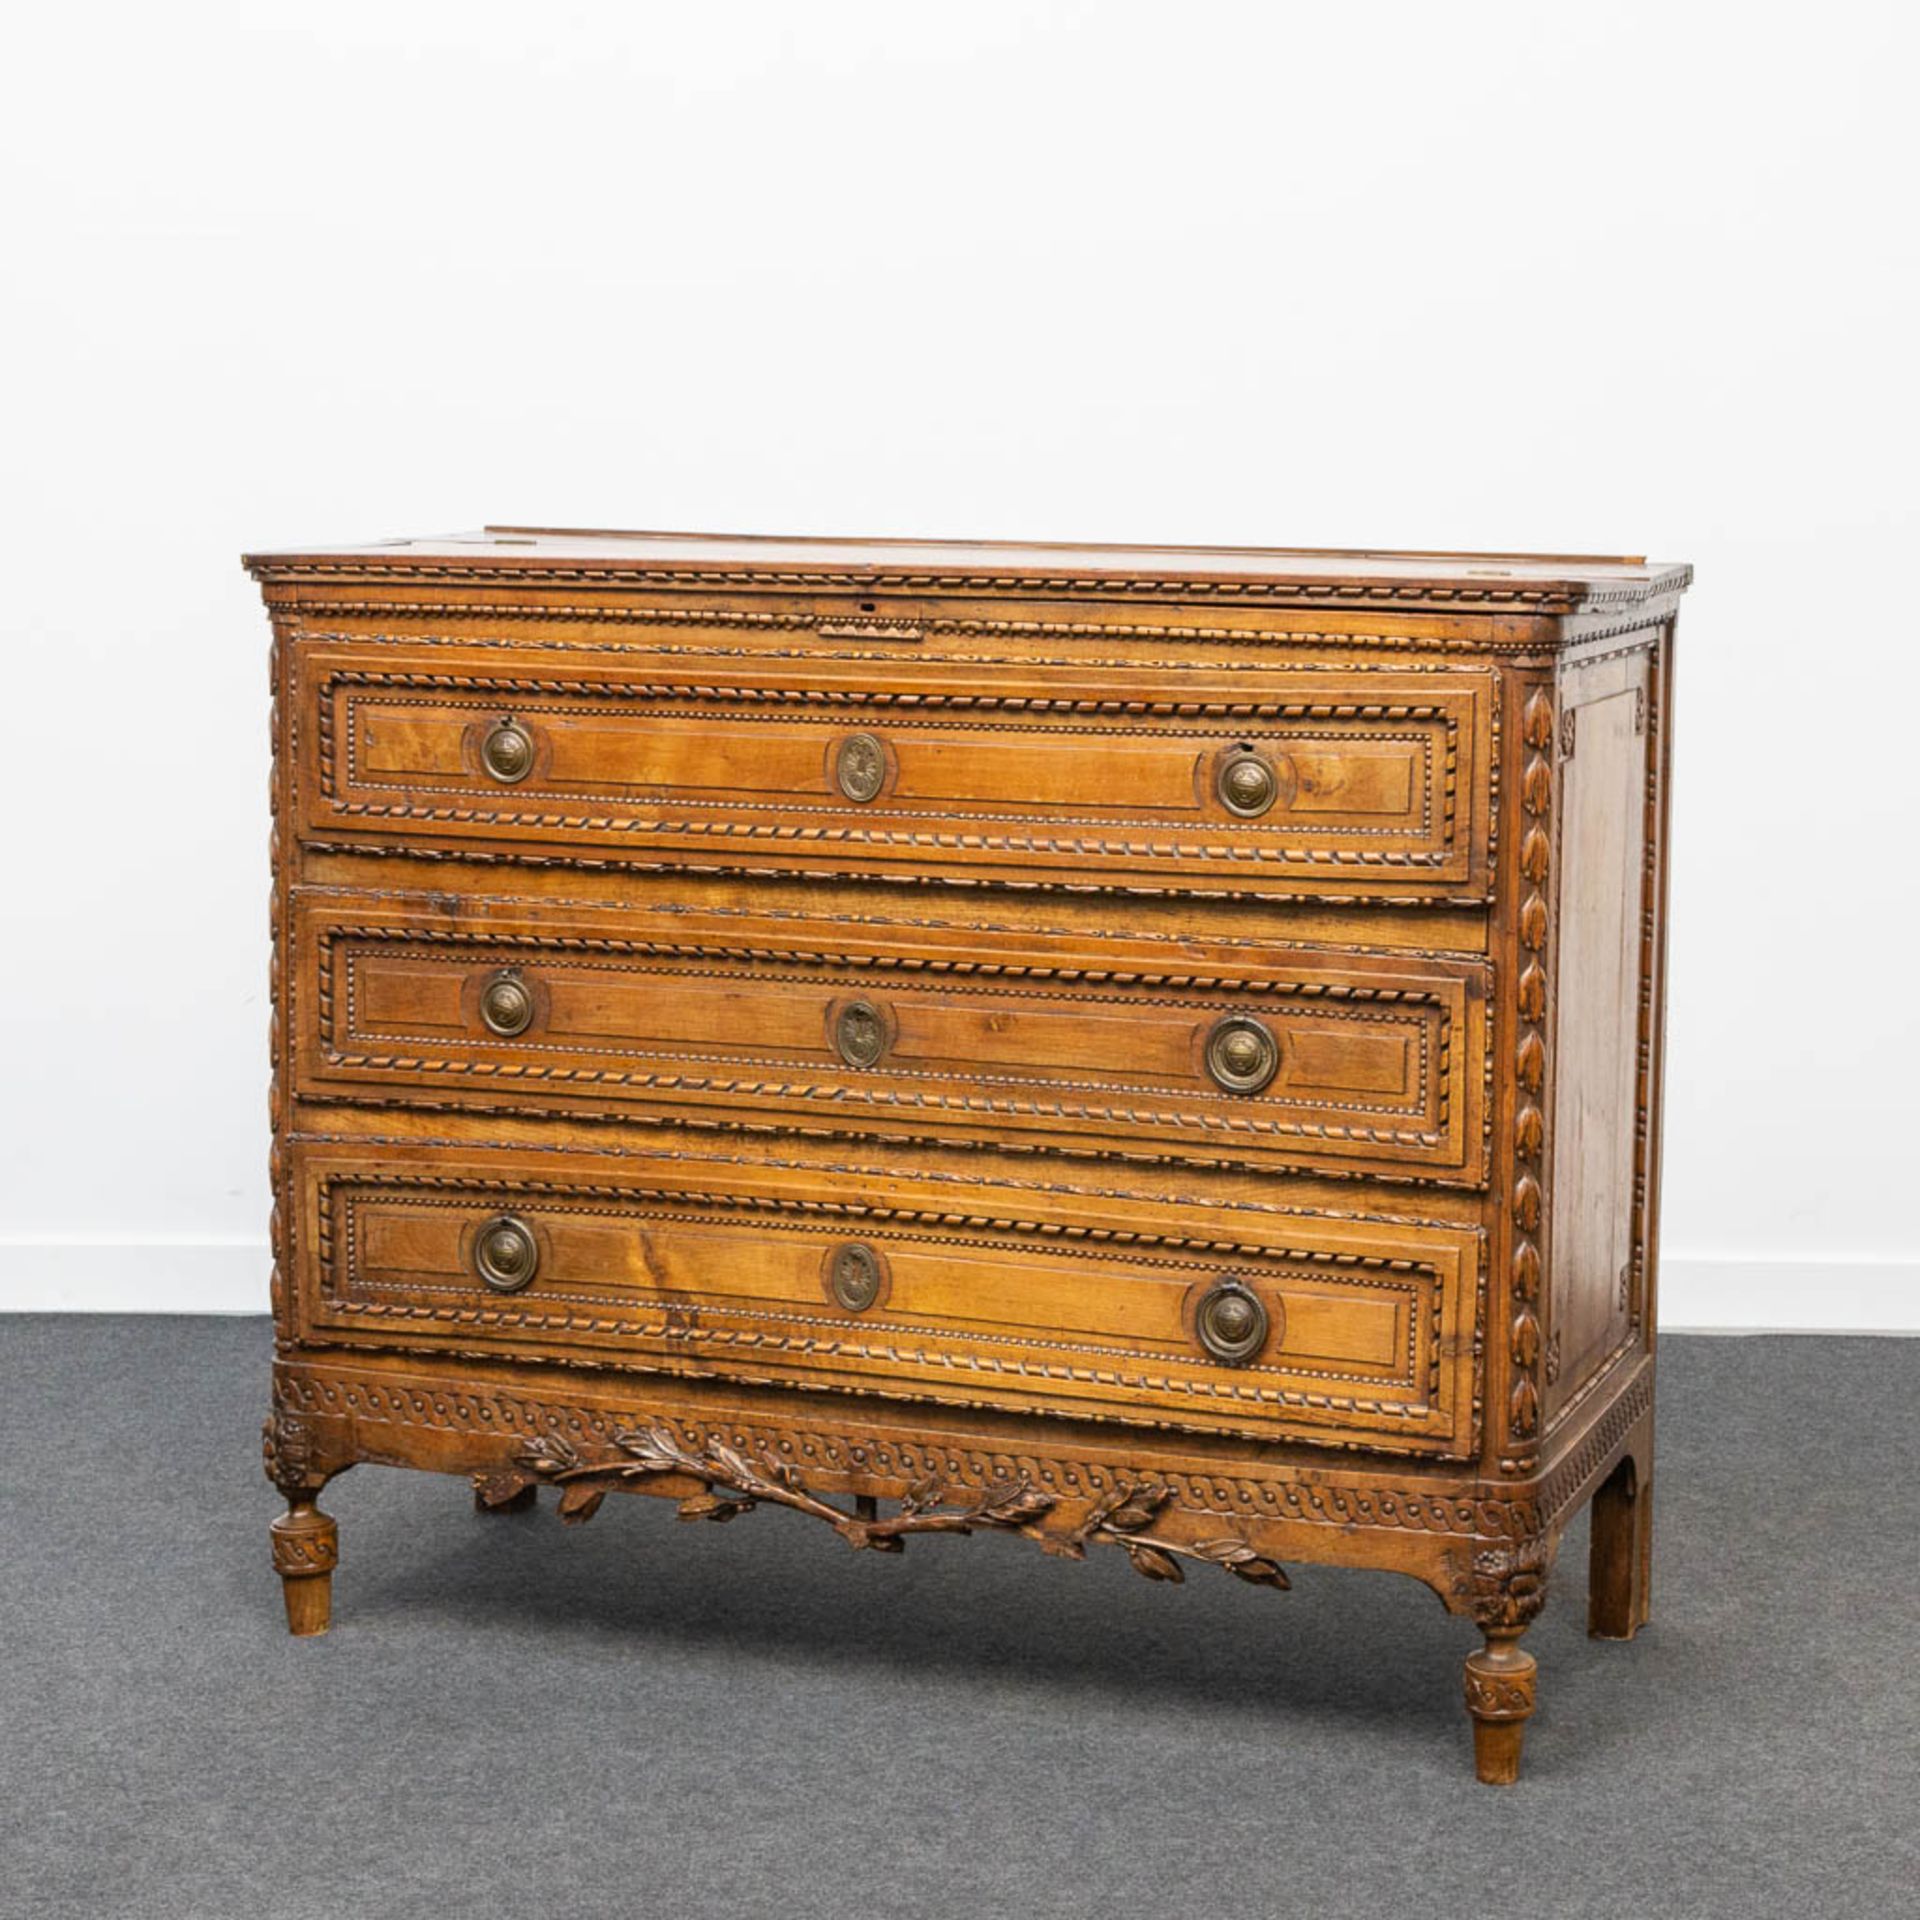 A wood sculptured commode in Louis XVI style, with 3 drawers and a hidden desk. 18th century. - Bild 8 aus 23